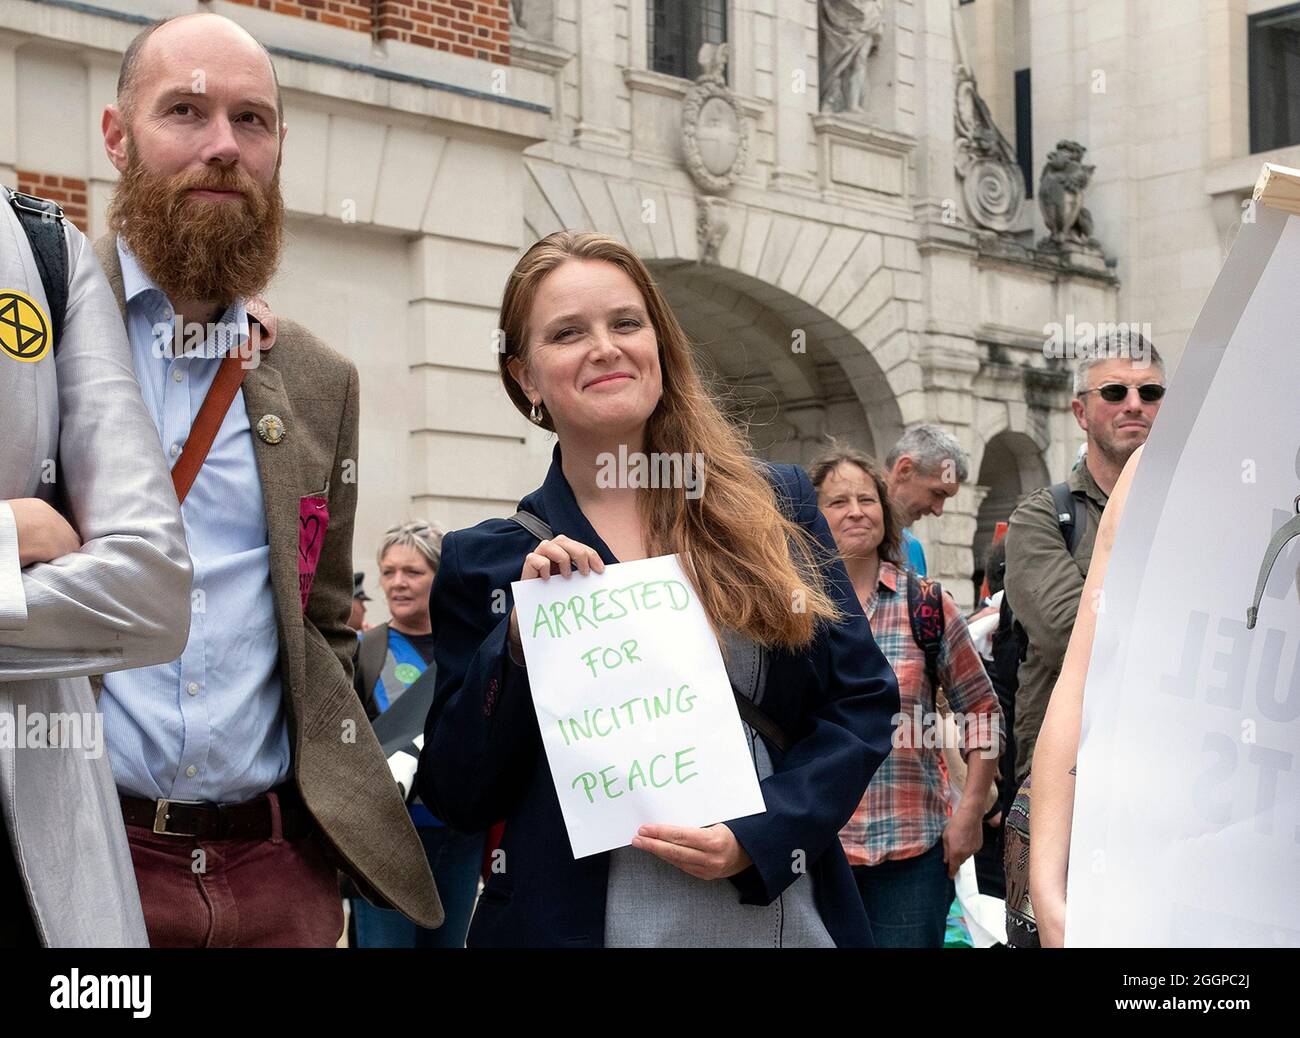 Protestor holds a placard saying 'ARRESTED FOR INCITING PEACE' as protestors continue march from Tate Modern during Extinction Rebellion's Mass Bail Break protest on the eleventh day of their Impossible Rebellion protests in London, United Kingdom on September 2, 2021. Stock Photo